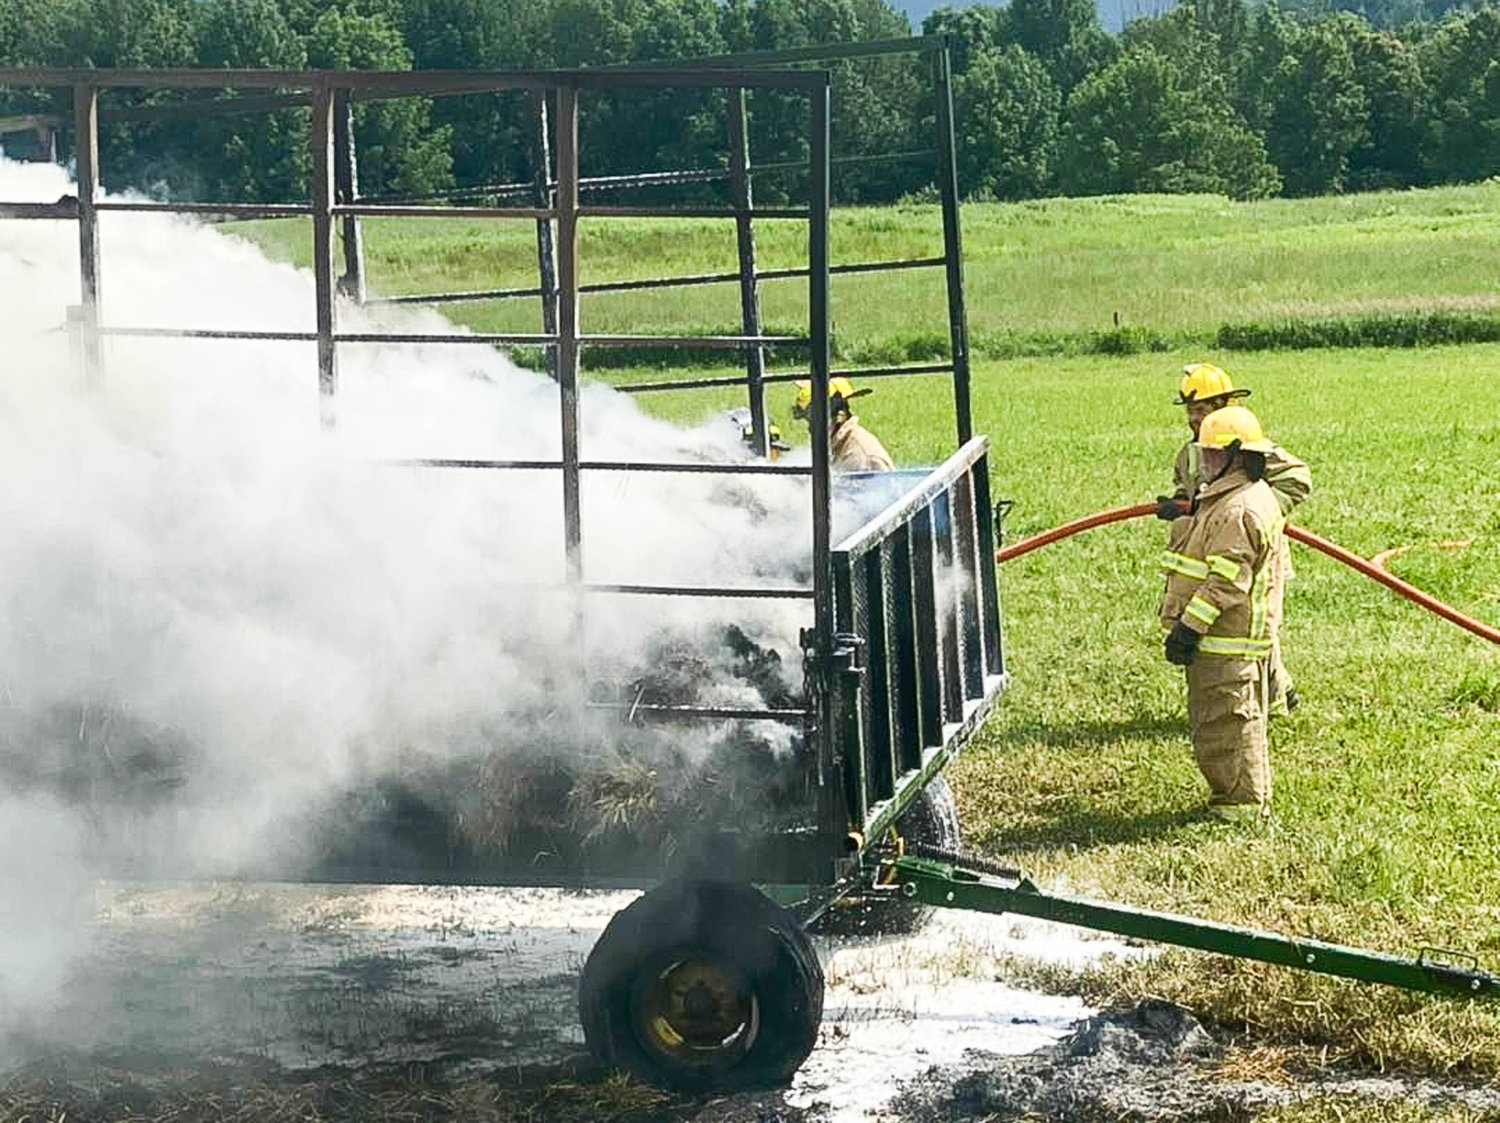 Town of Western firefighters douse a hay wagon fire on Quaker Hill Road at about 3:30 p.m. on Sunday. Temperatures reached nearly 90 degrees Sunday afternoon, and fire officials said hay is sometimes known to spontaneously combust when packed tightly in the heat. Once doused, authorities said the hay was dug out and spread across the ground to water down again.